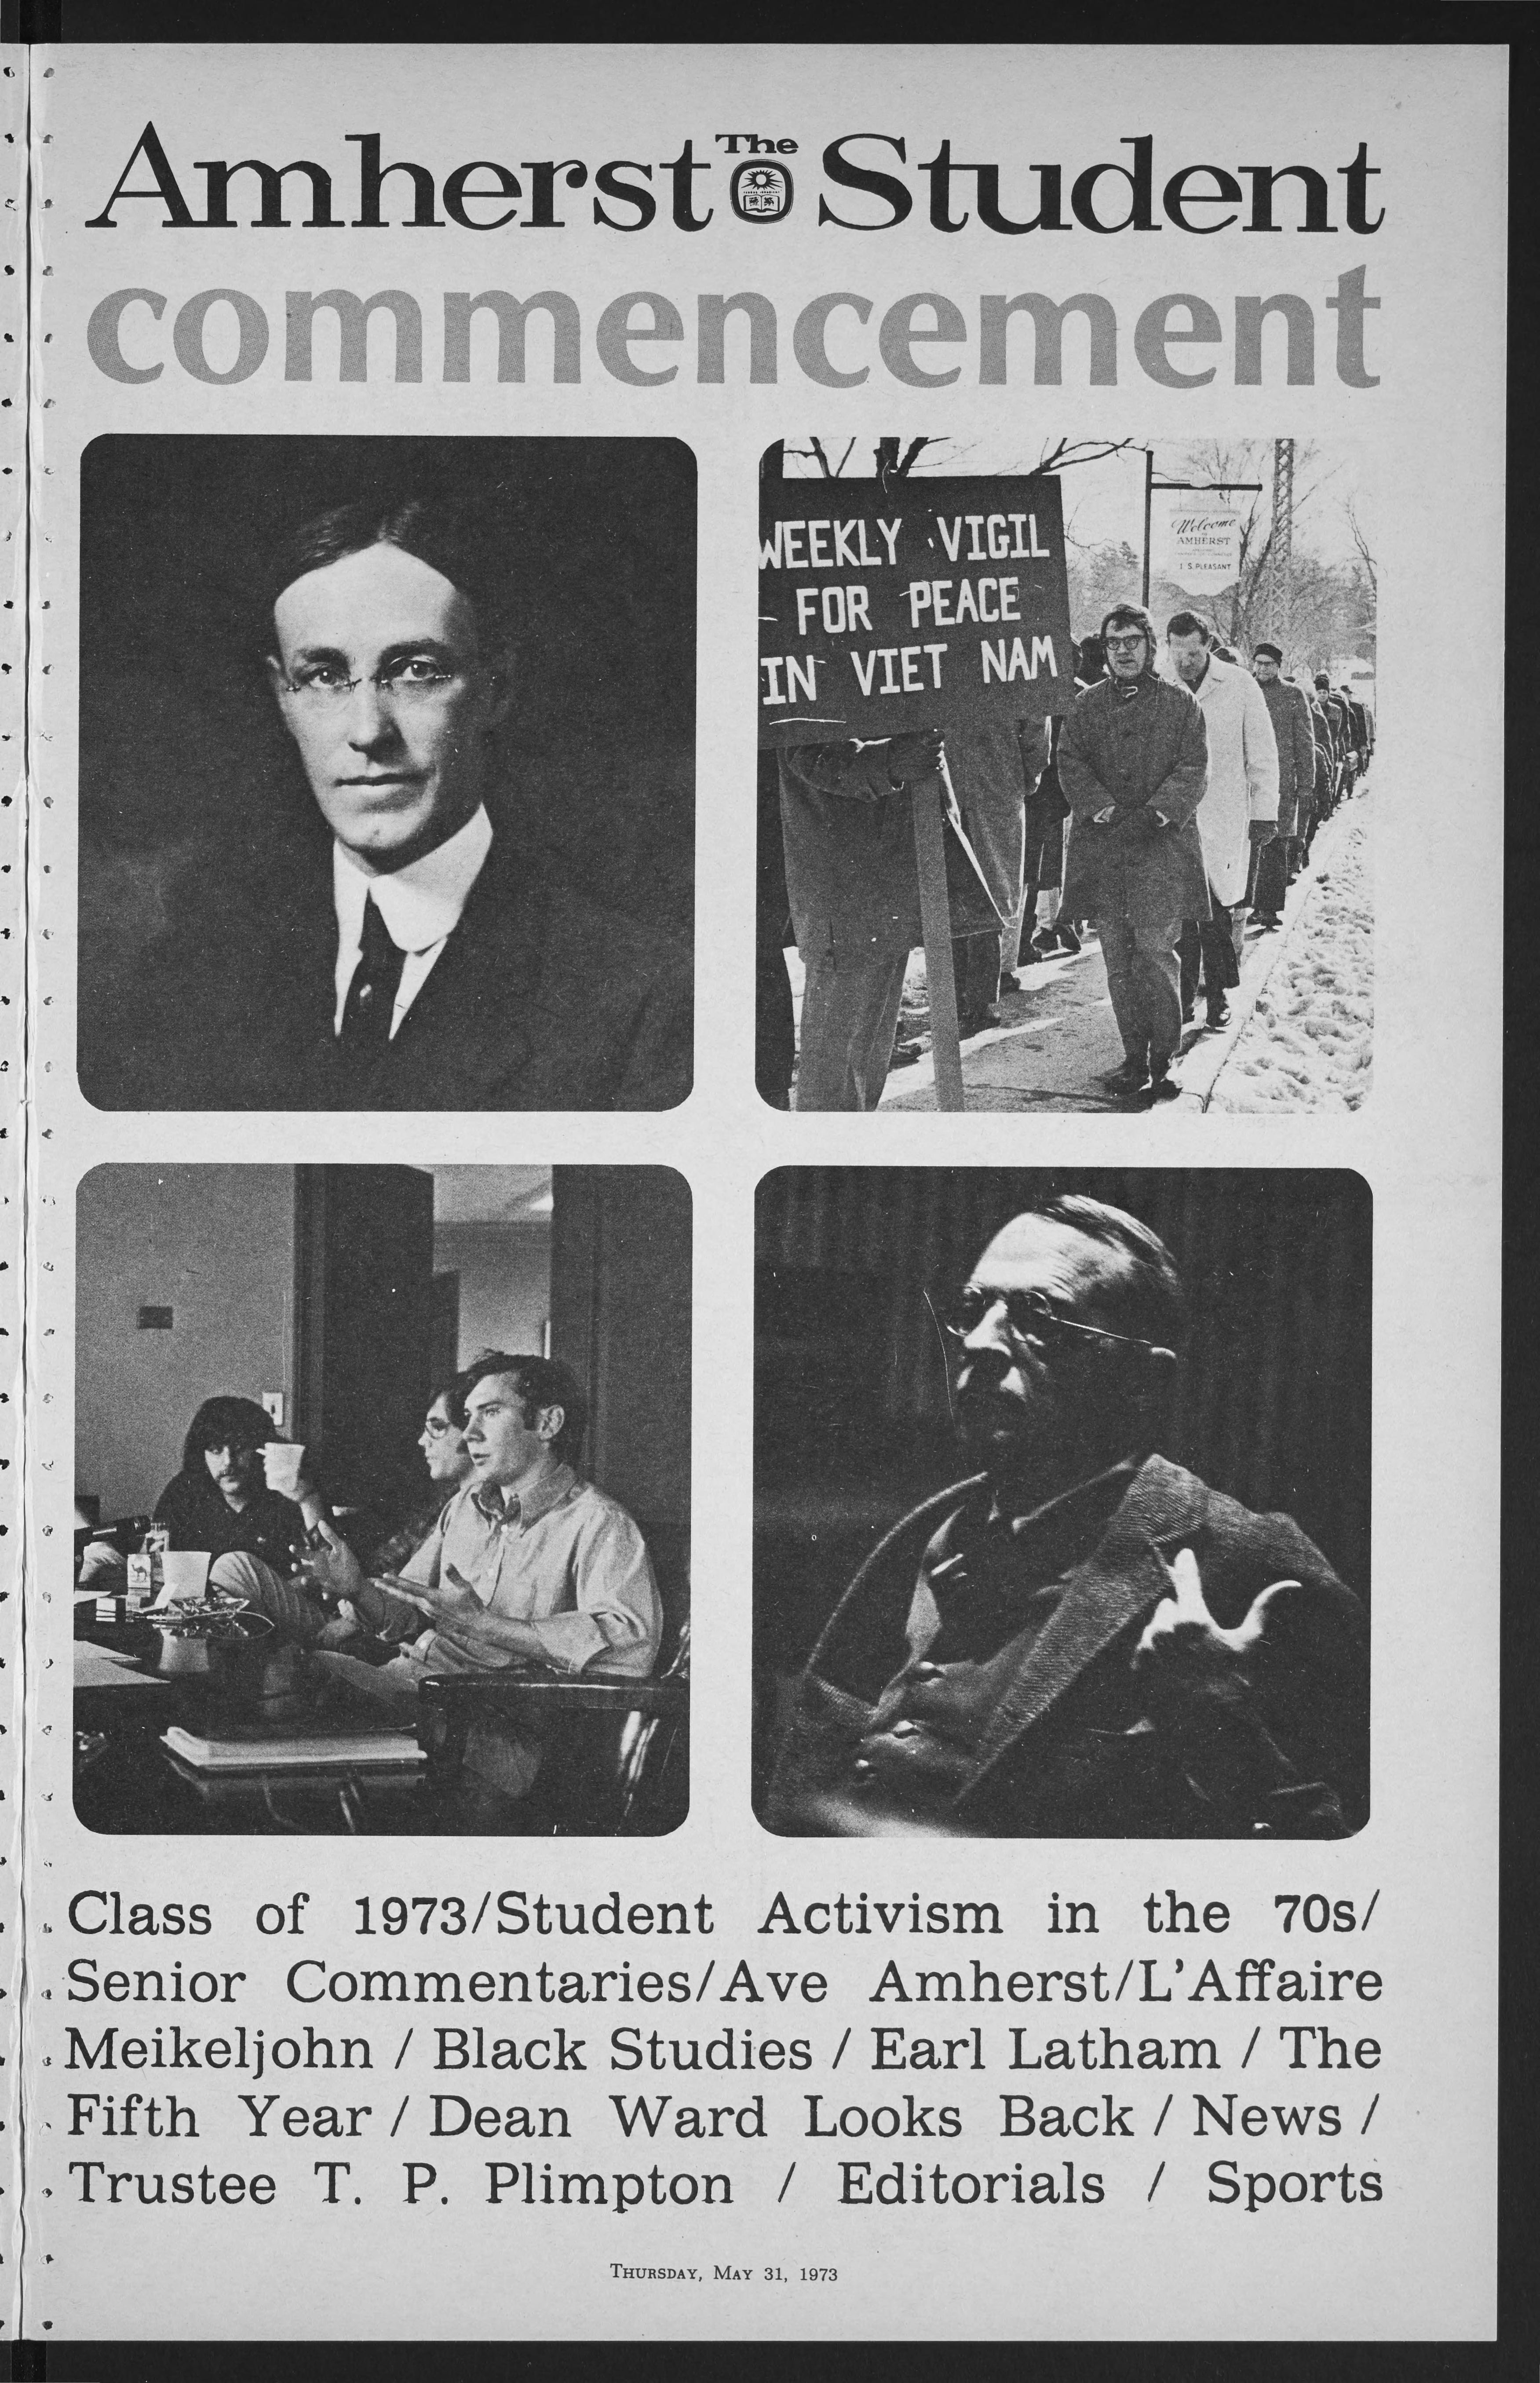 1973 Amherst Student Commencement issue